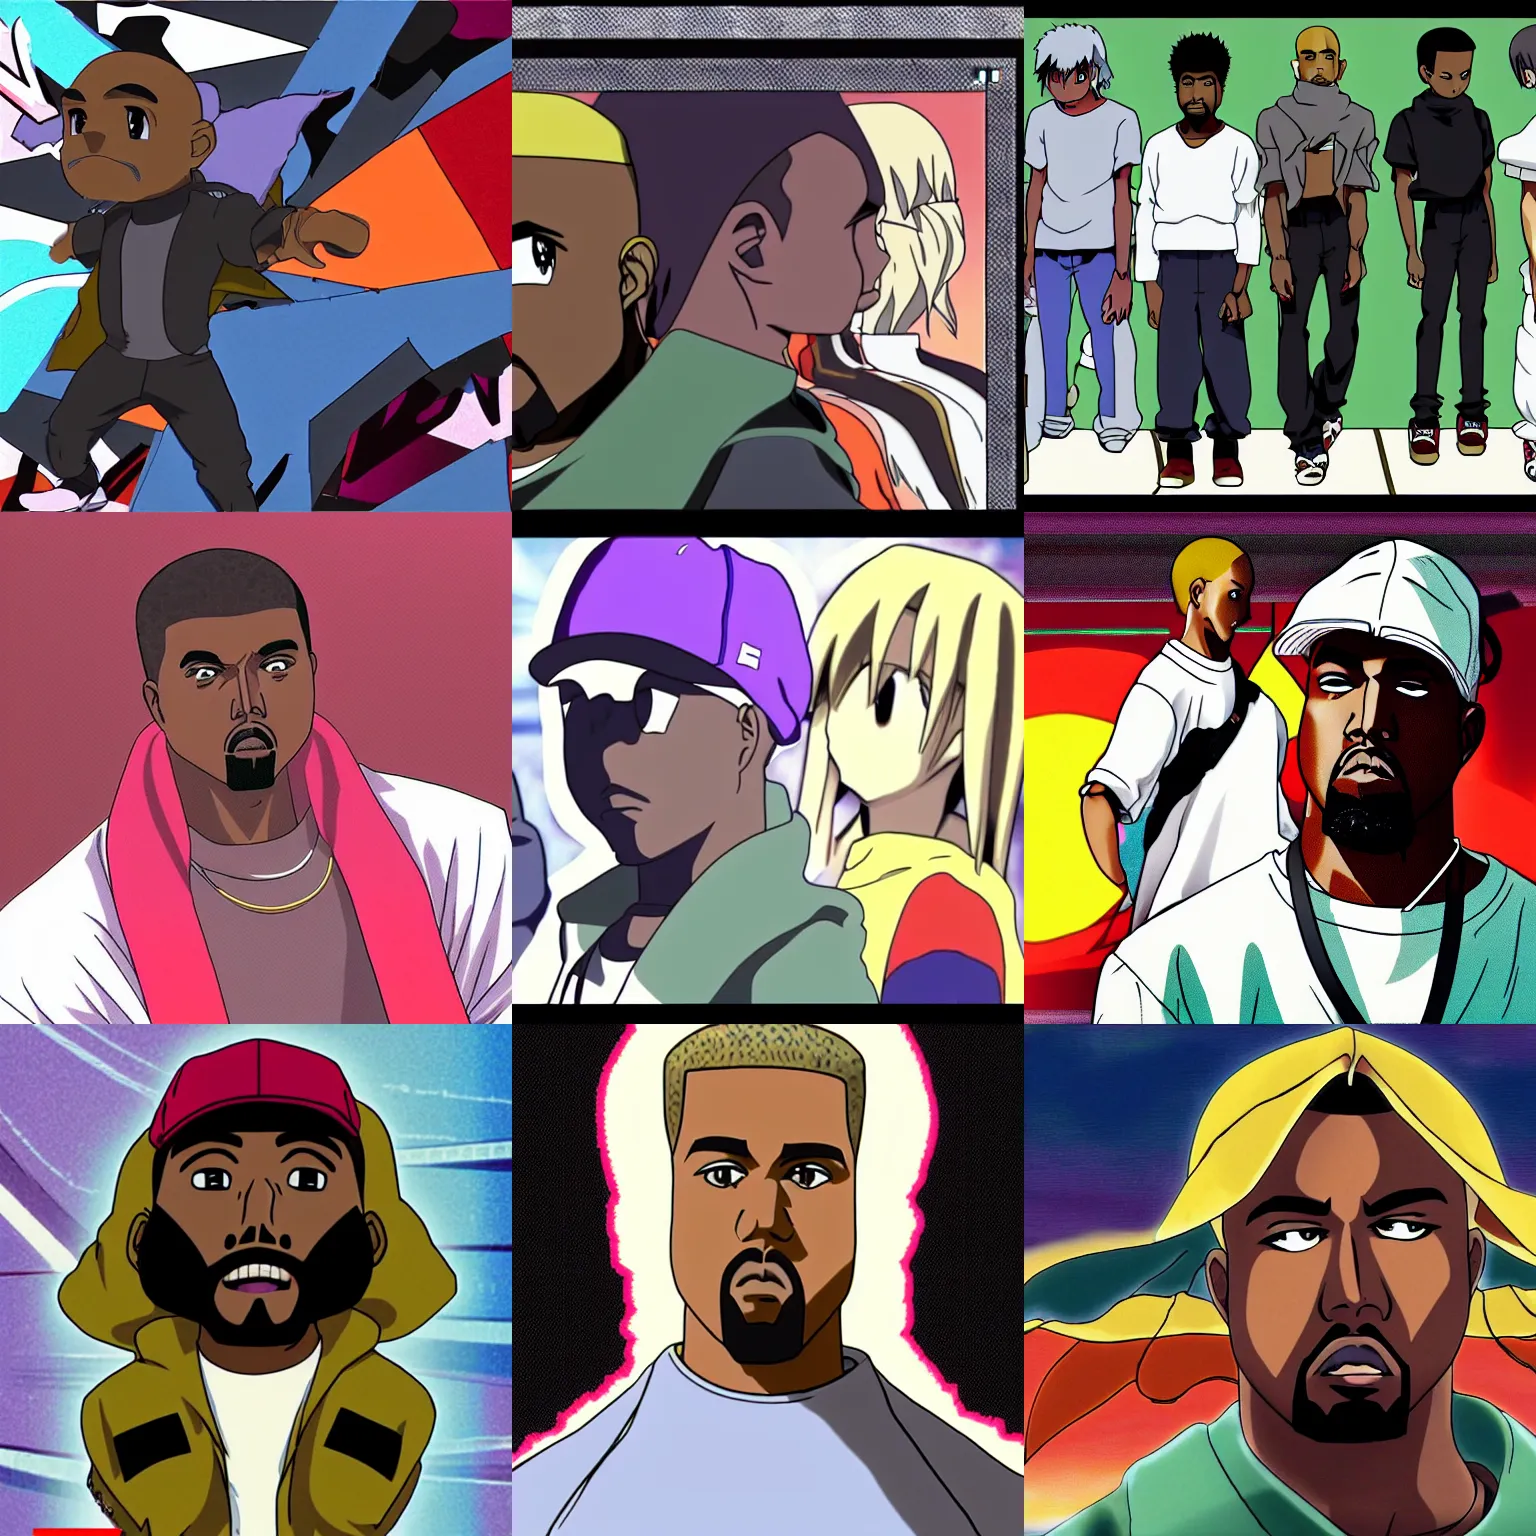 kanye in the style of anime created by an ai  rKanye